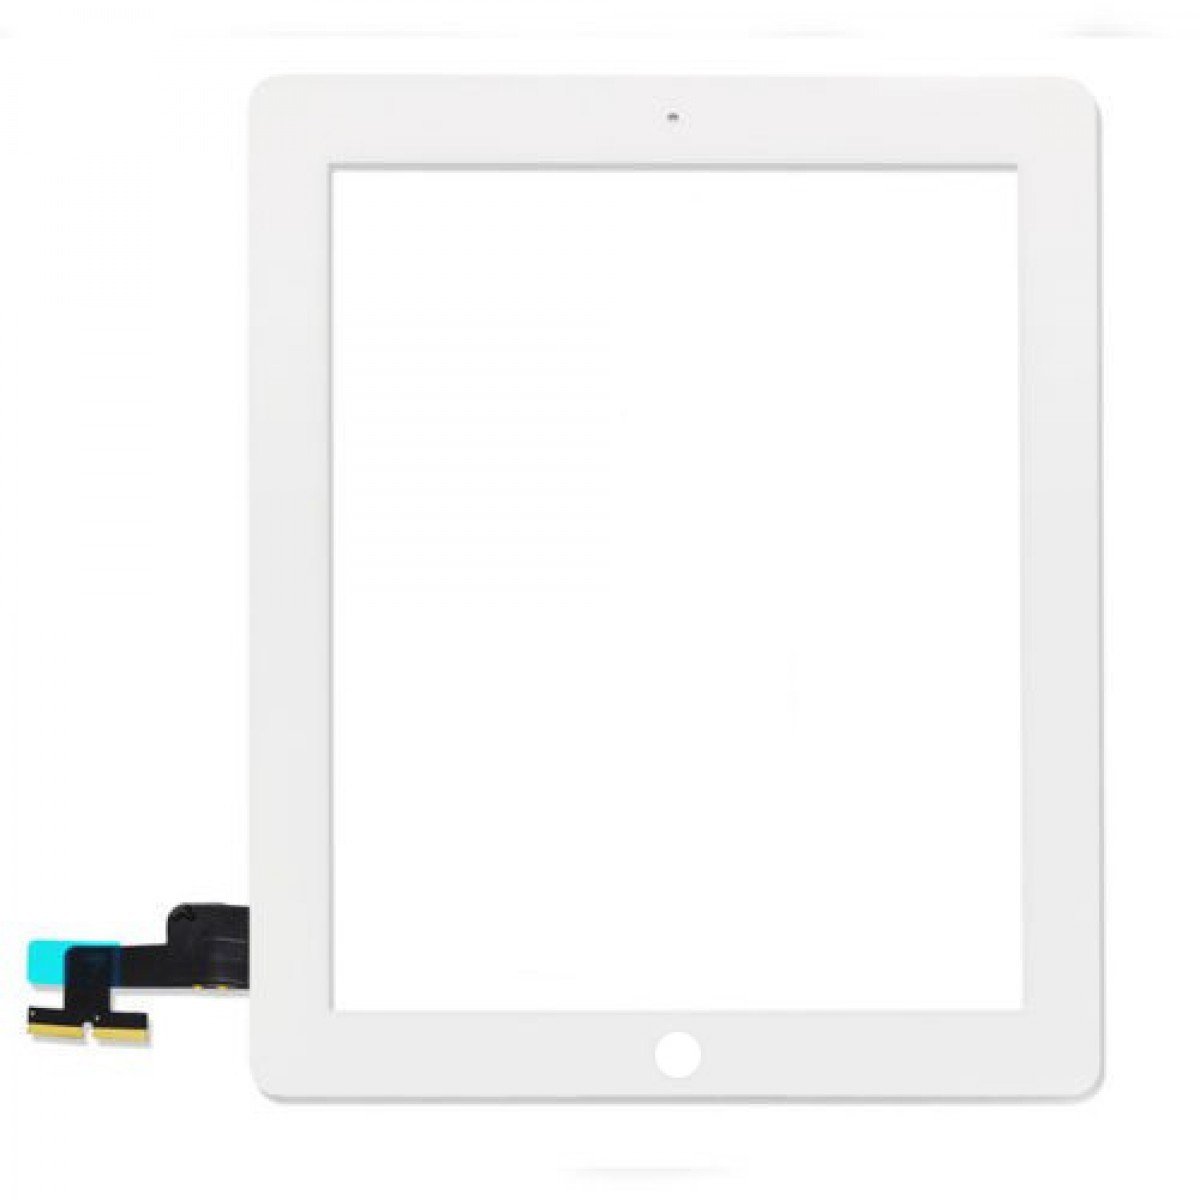 iPad 2 Glass & Touch Digitizer Replacement - White - Original Quality